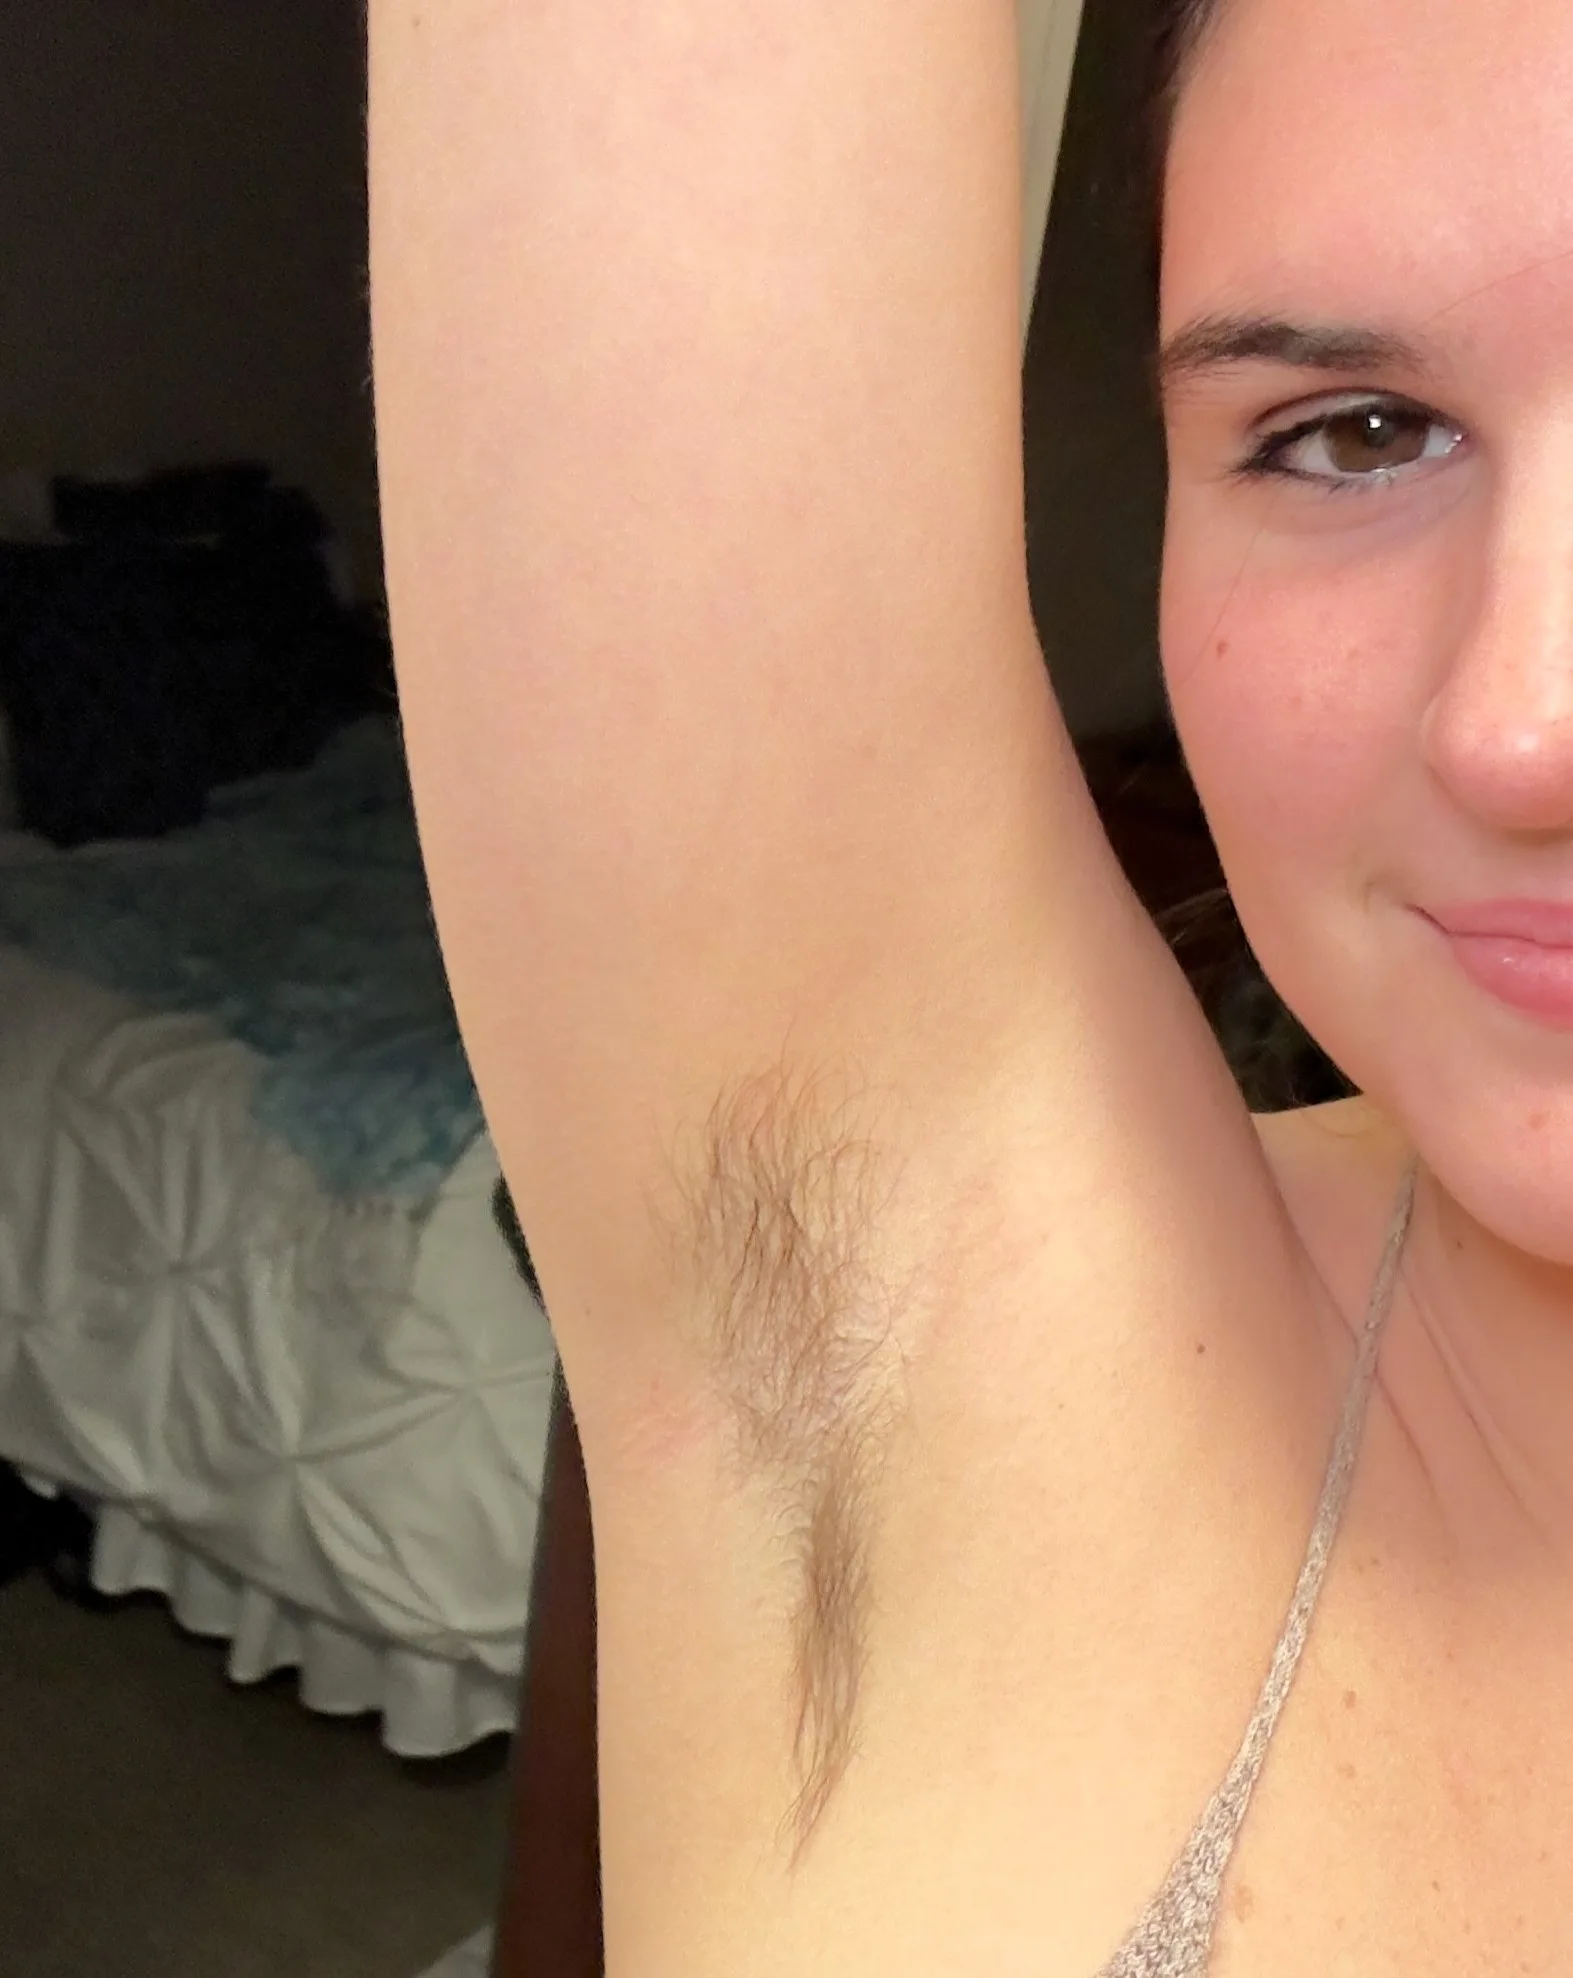 the woman who confidently displays her moustache online, defying trolls who likened her to Bigfoot. Faith Iris, a military member, embraces her body hair despite criticism, advocating for self-choice in grooming goes viral online.